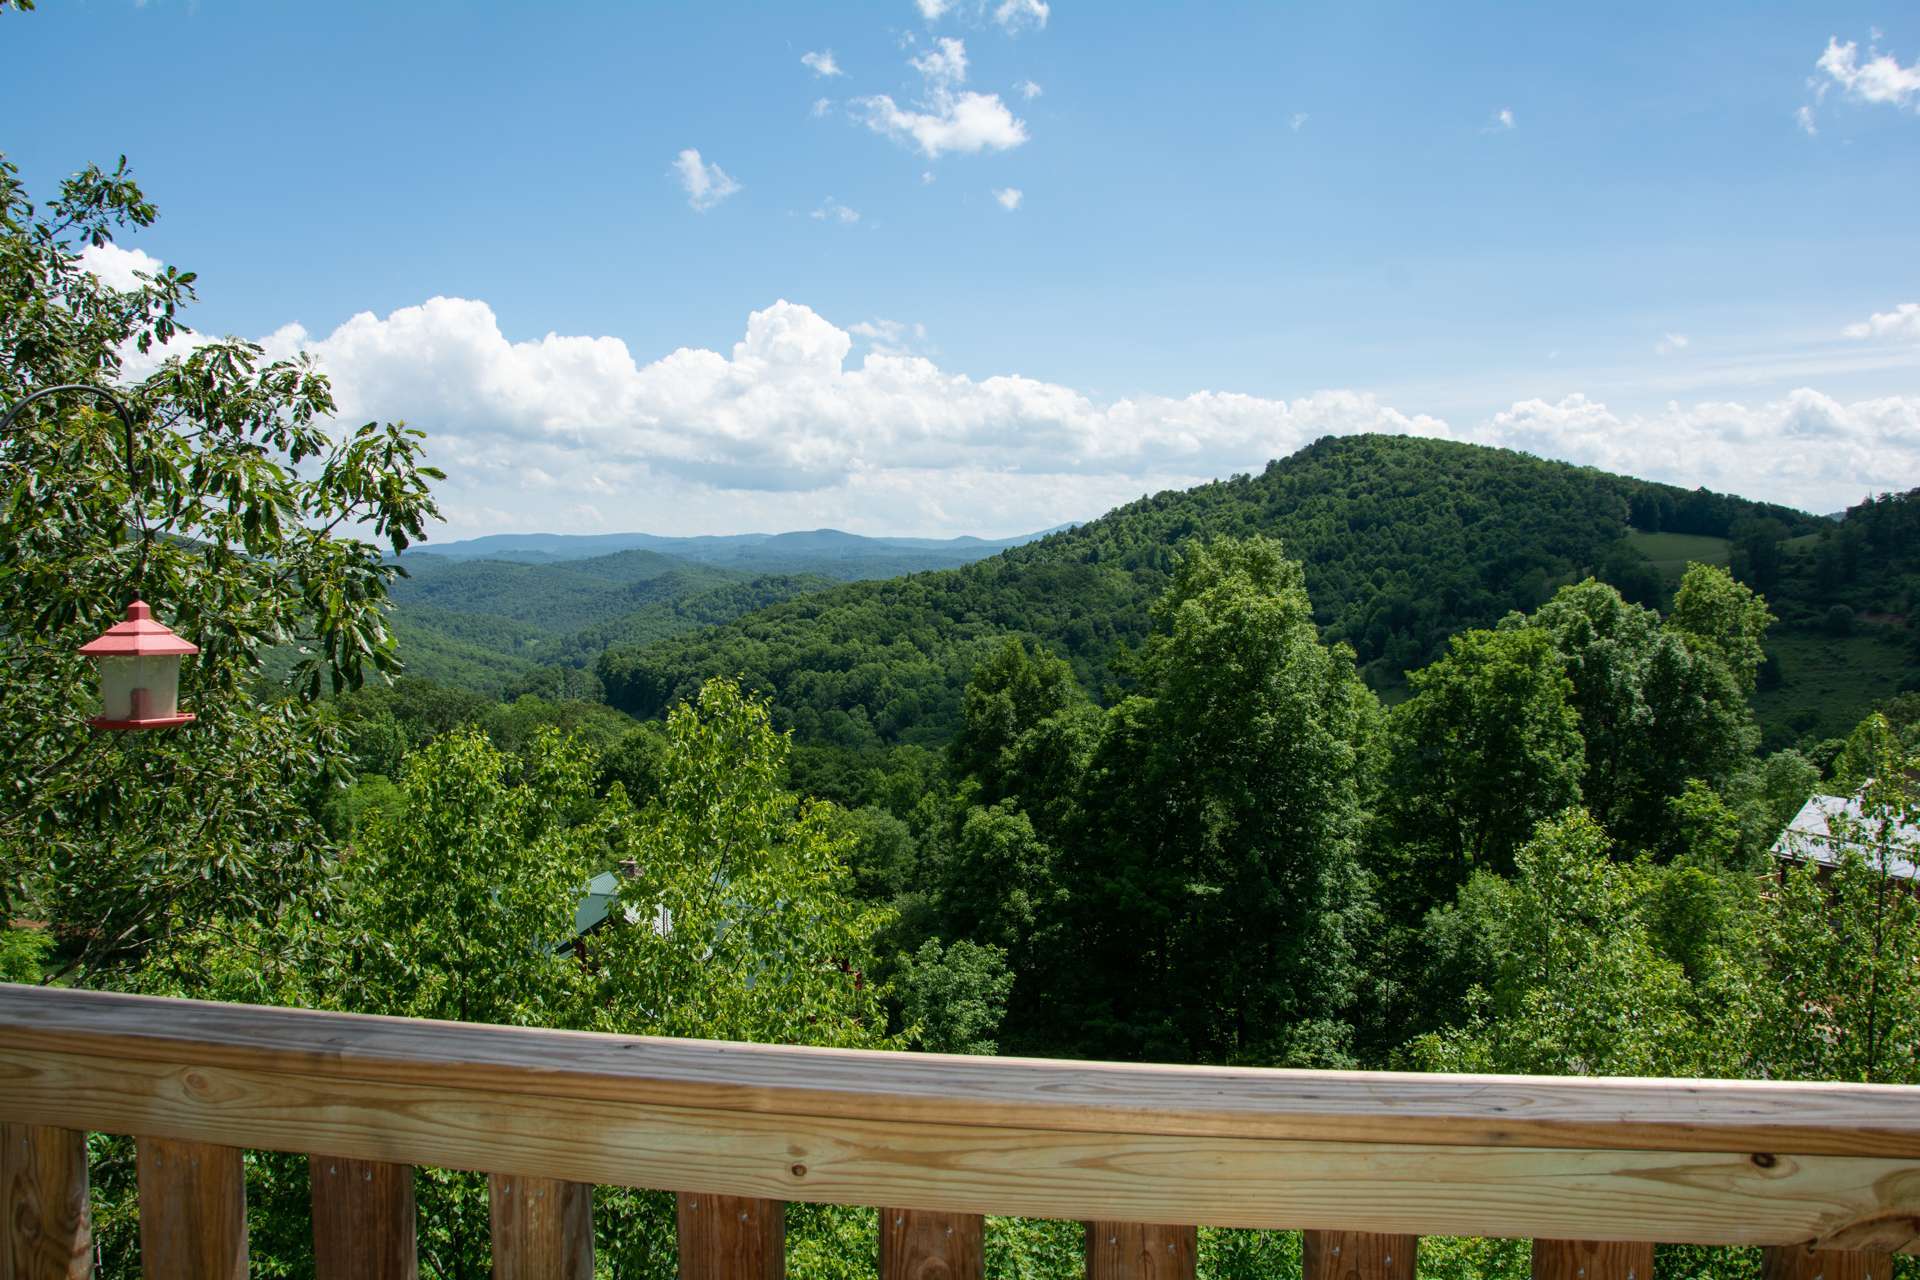 Enjoy a stunning display of Blue Ridge Mountain views from either of the full length decks on the main and lower levels.